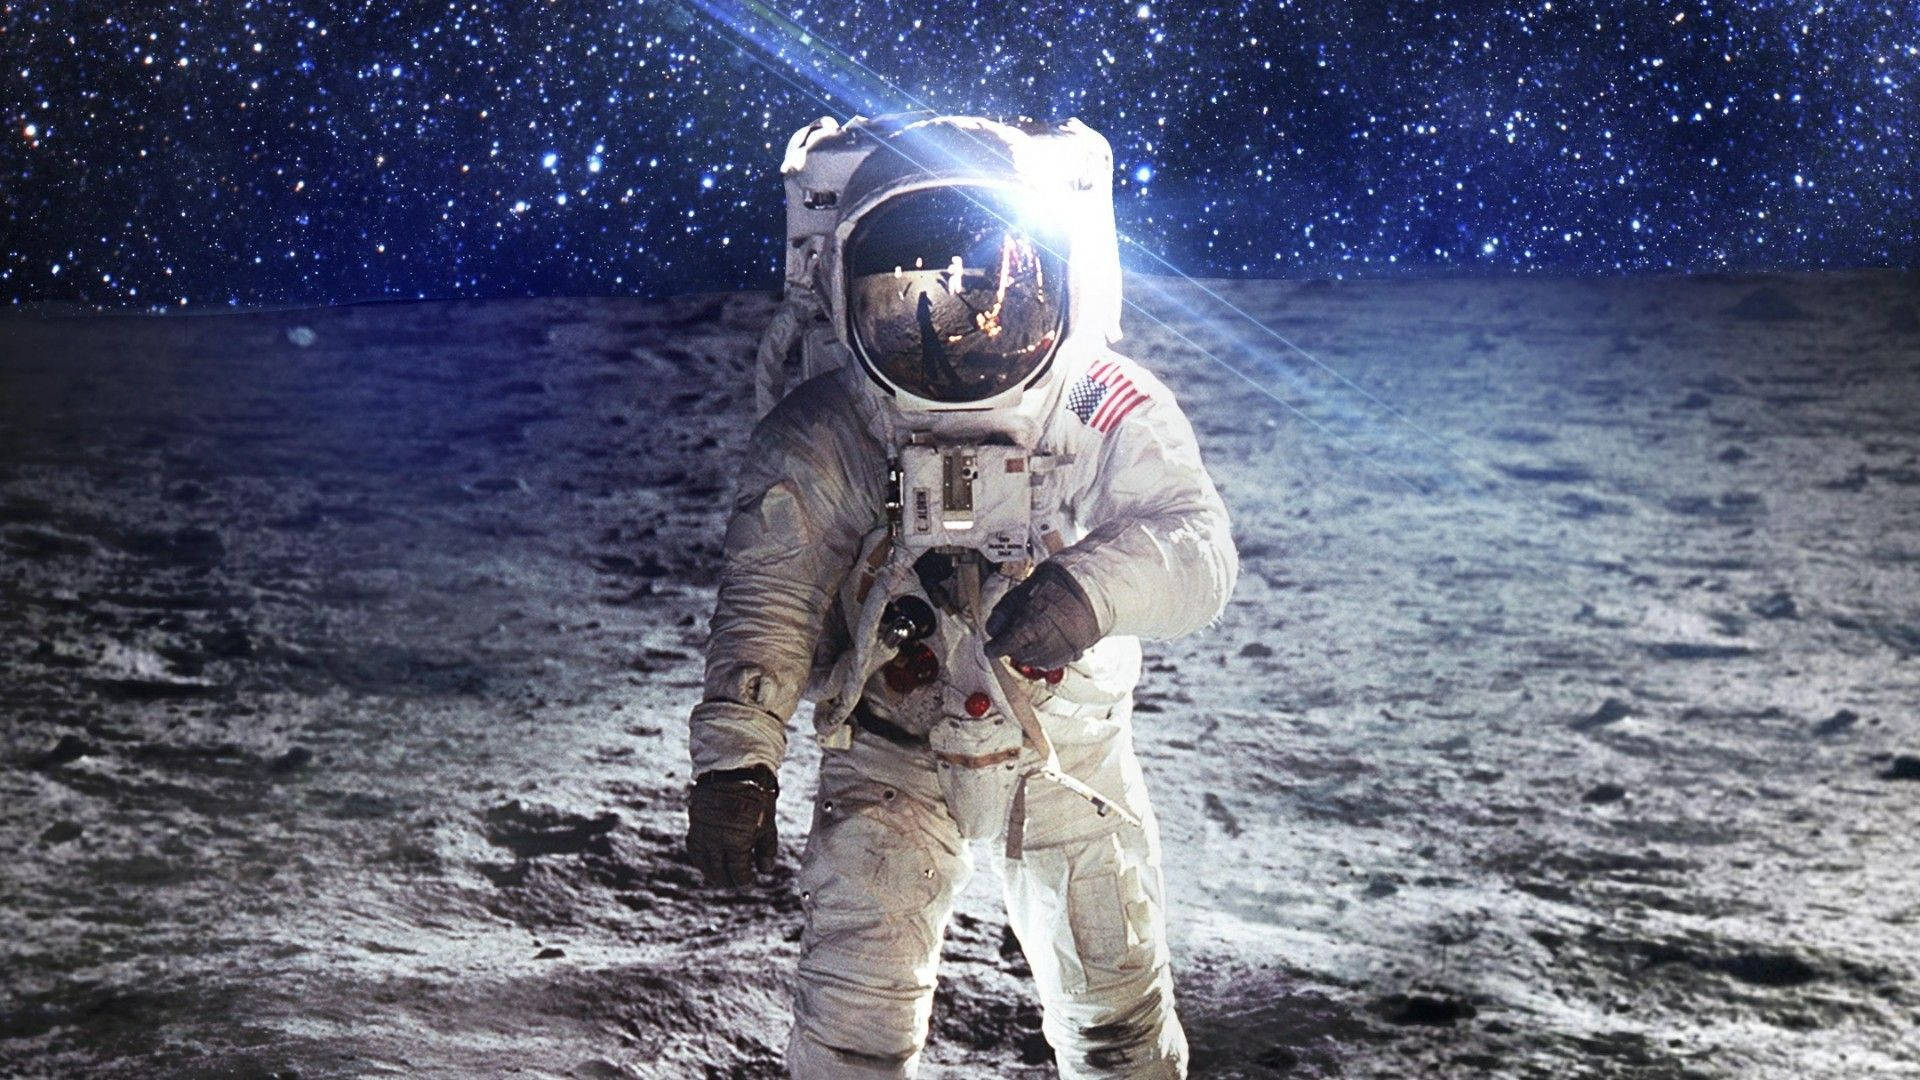 Download Astronaut On The Moon Wallpaper